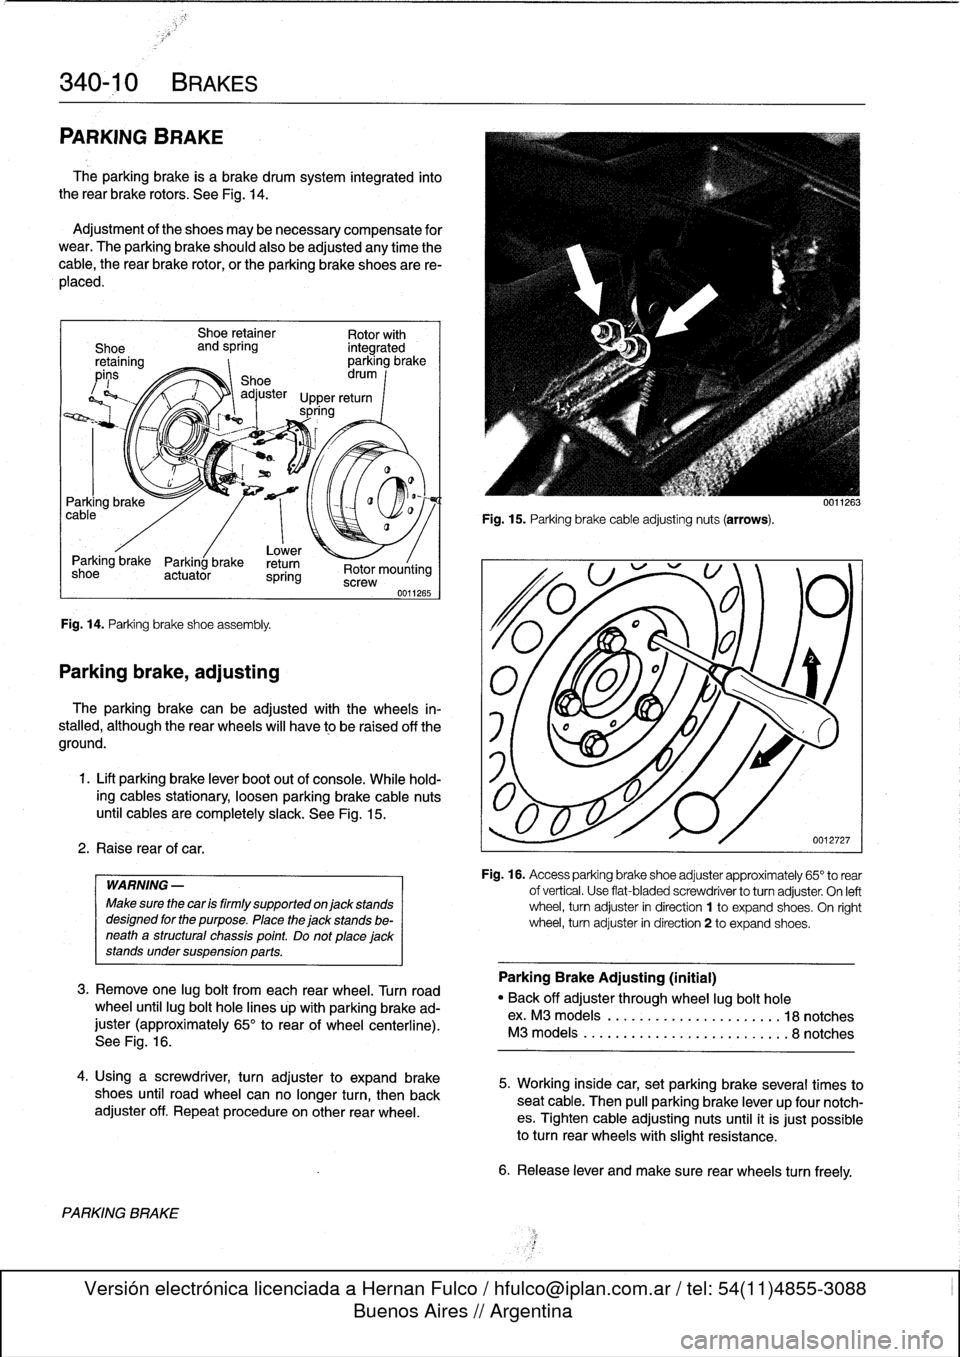 BMW 323i 1998 E36 Workshop Manual 
340-
1
0
BRAKES

PARKING
BRAKE

The
parking
brake
is
a
brake
drum
system
integrated
into
the
rear
brake
rotors
.
See
Fig
.
14
.

Adjustment
of
the
shoes
may
benecessary
compensate
for
wear
.
The
park